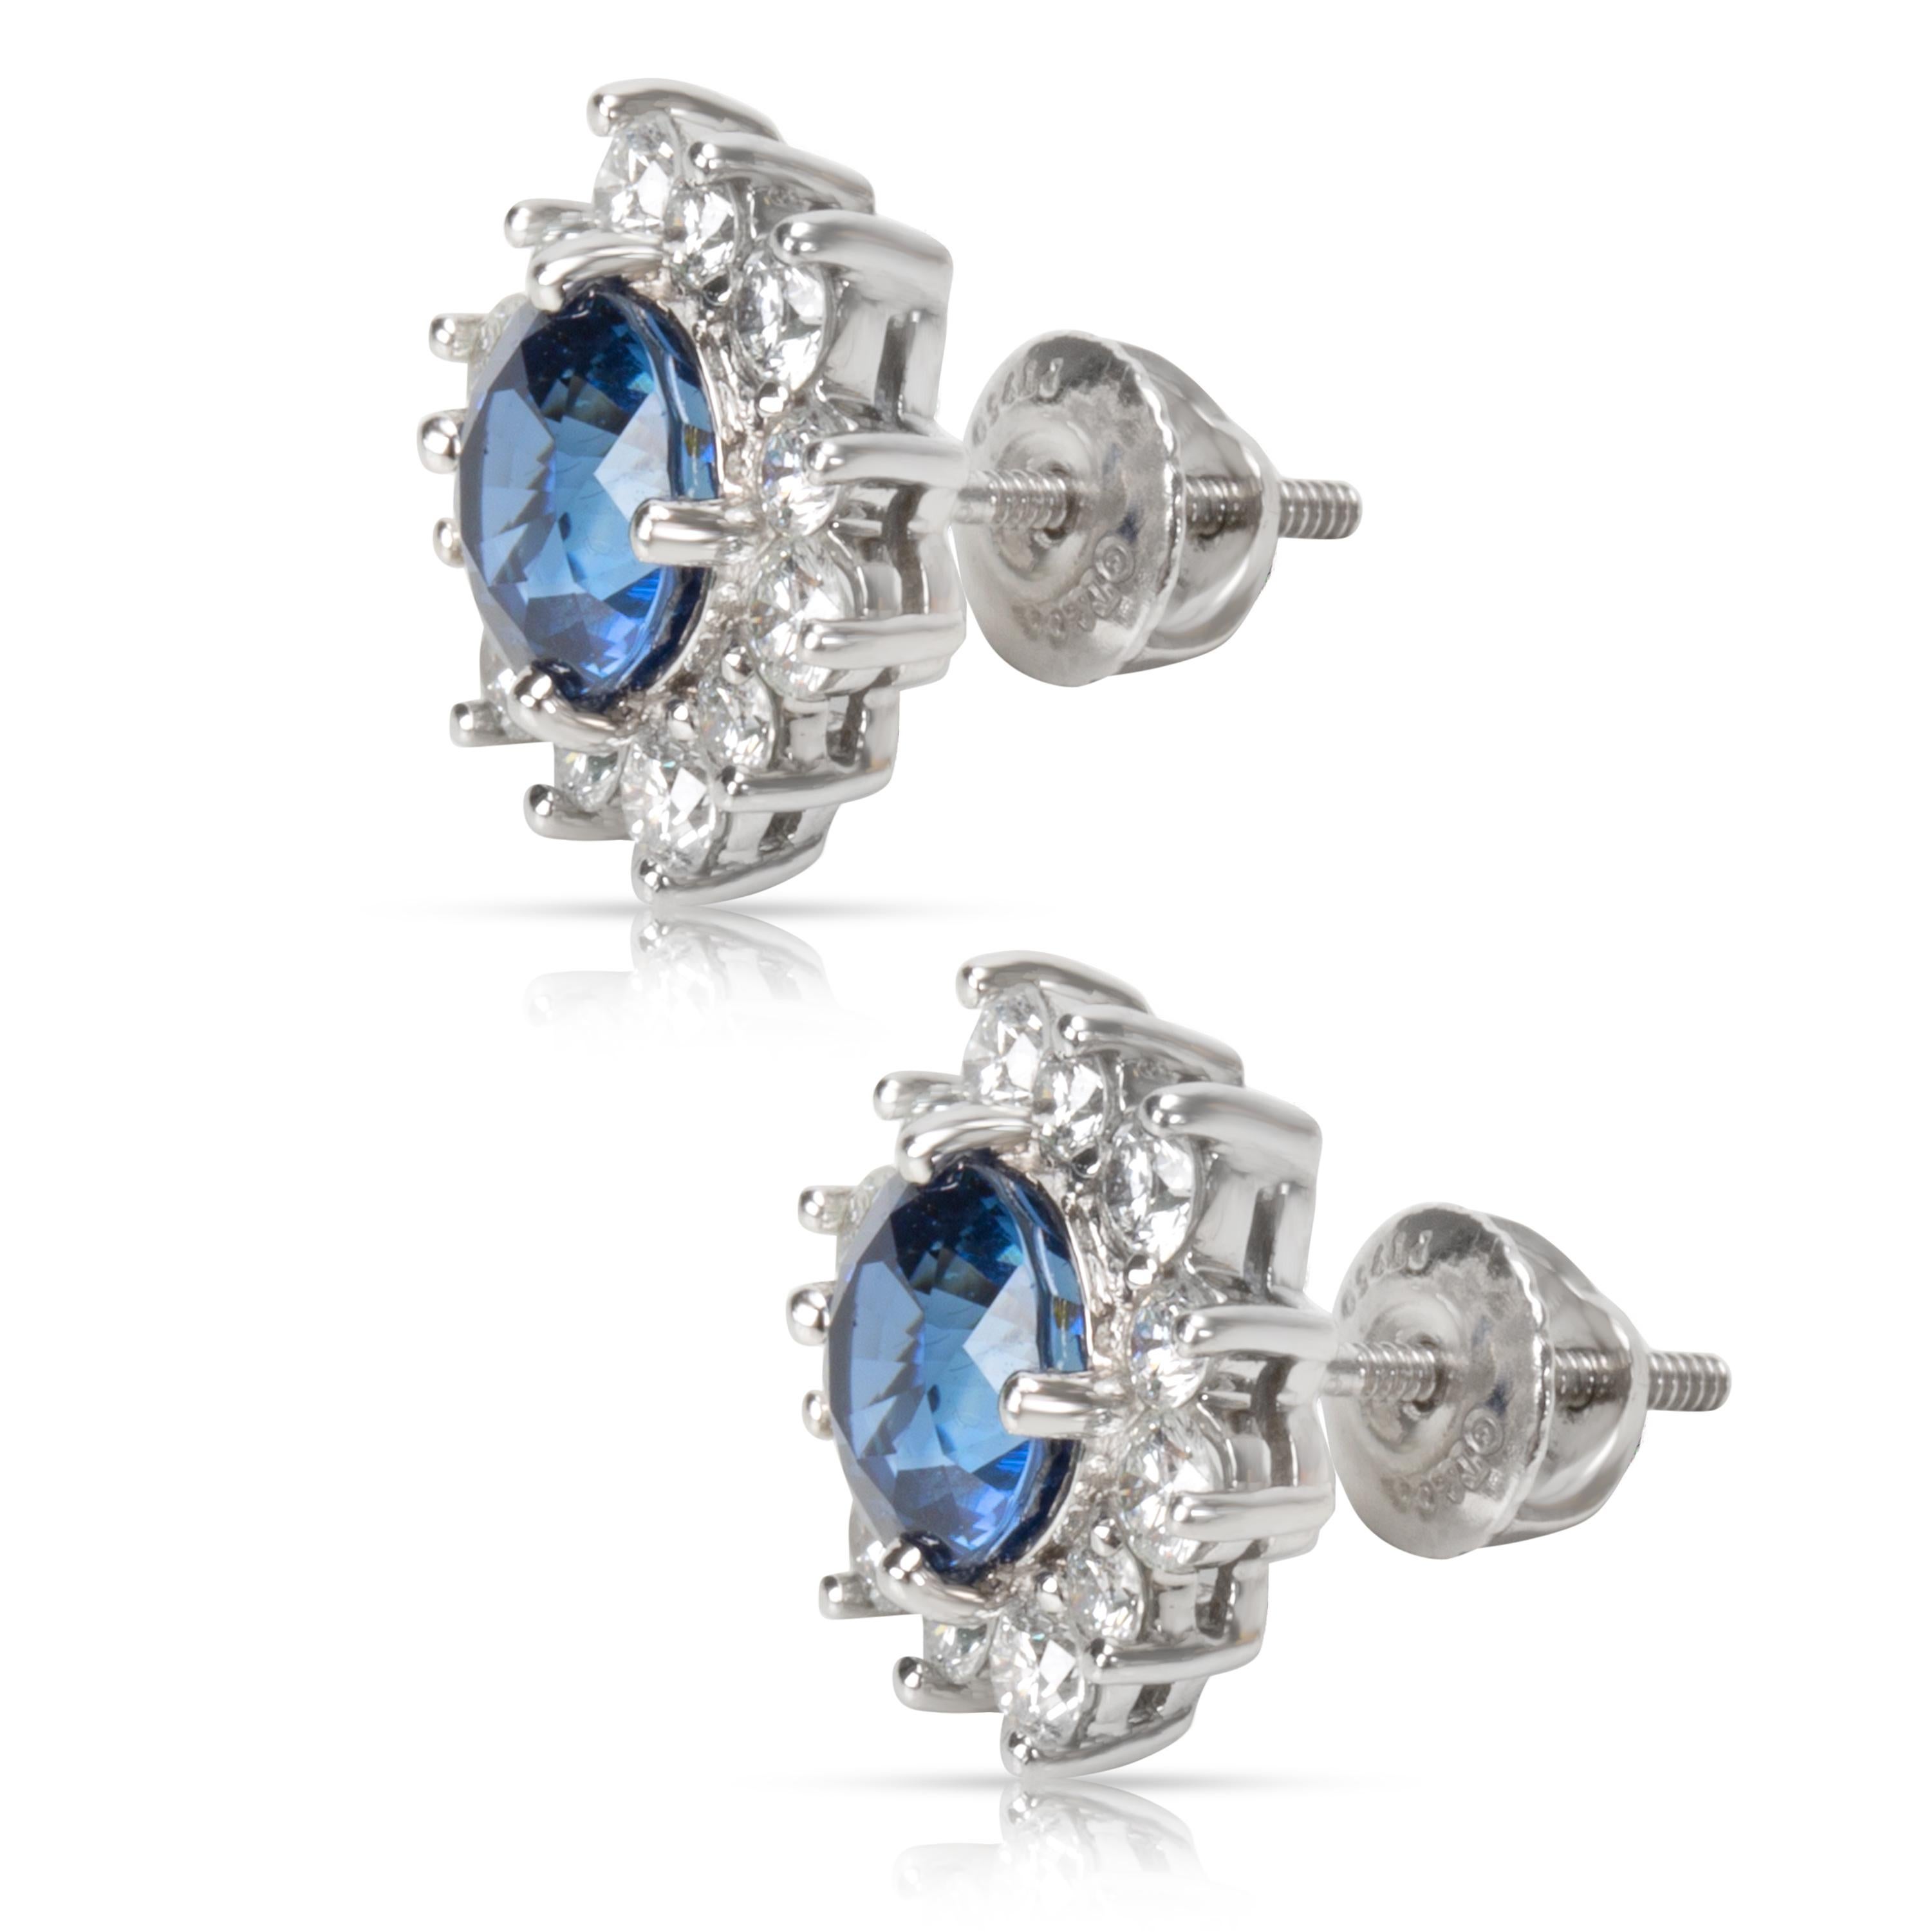 Tiffany & Co. Sapphire & Diamond Earrings in Platinum 1.06 CTW

PRIMARY DETAILS
SKU: 095115
Listing Title: Tiffany & Co. Sapphire & Diamond Earrings in Platinum 1.06 CTW
Condition Description: Retail price 32,500 USD. In excellent condition. Comes